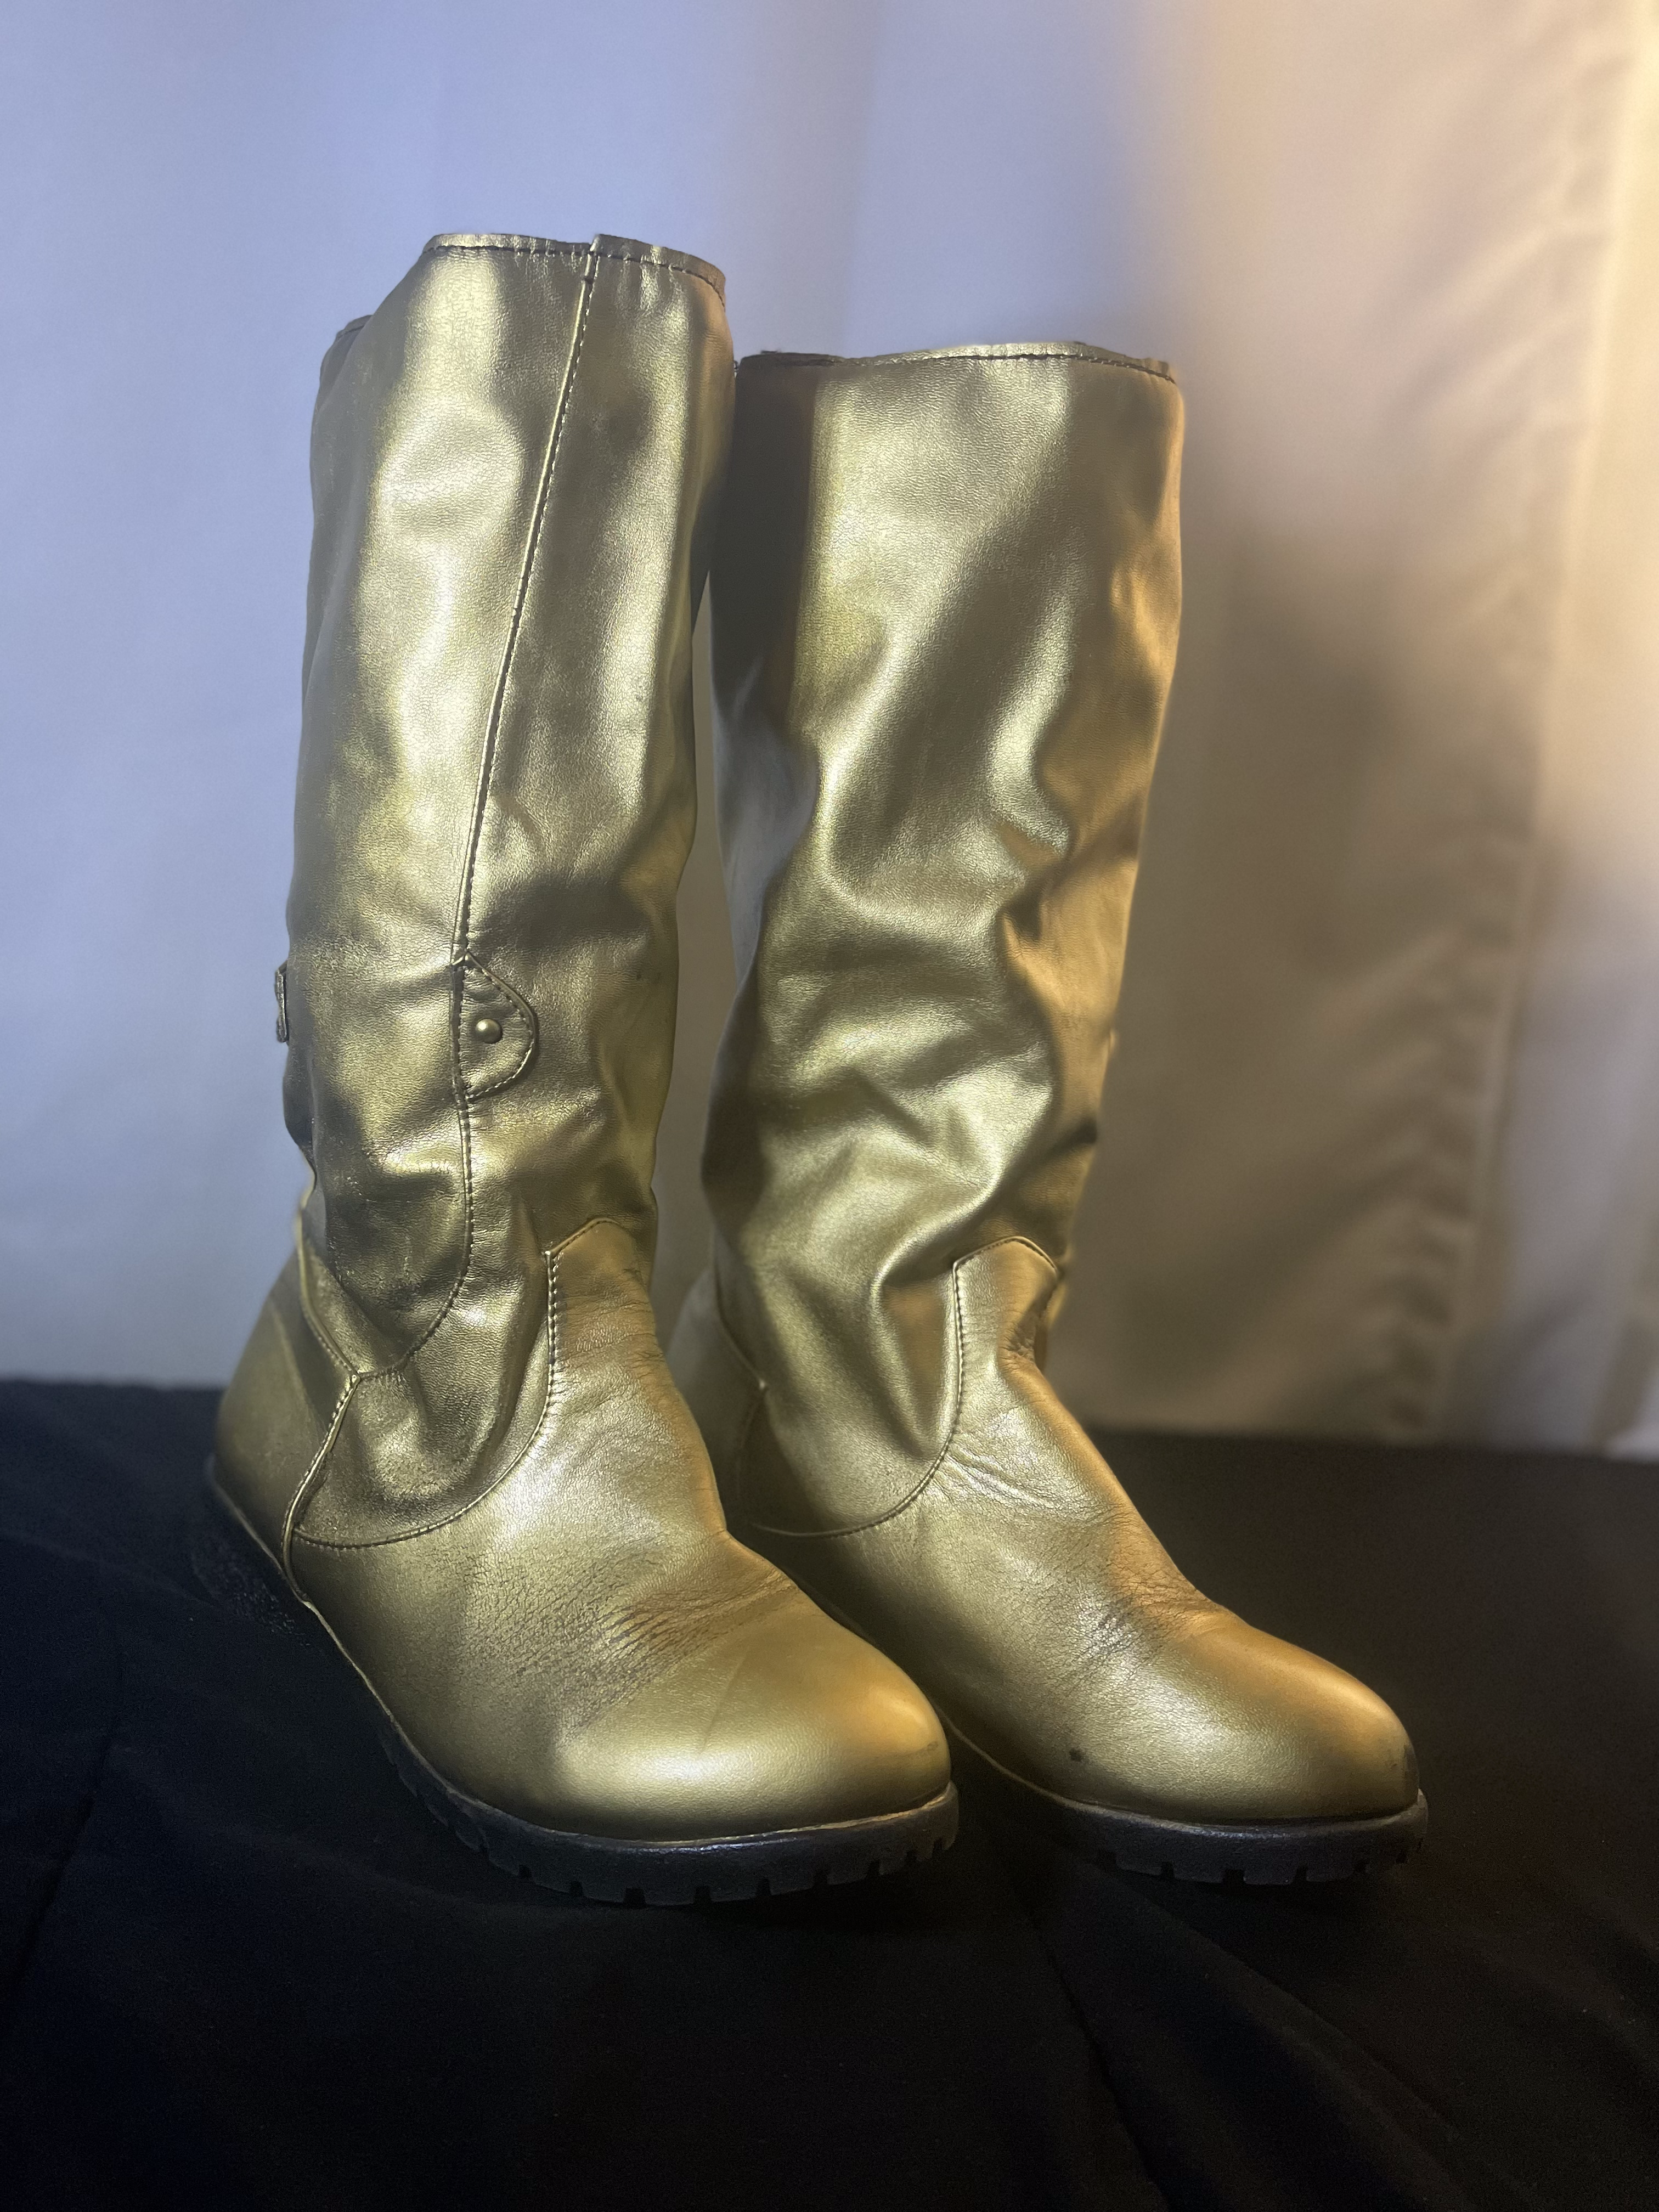 Mysterio's gold boots